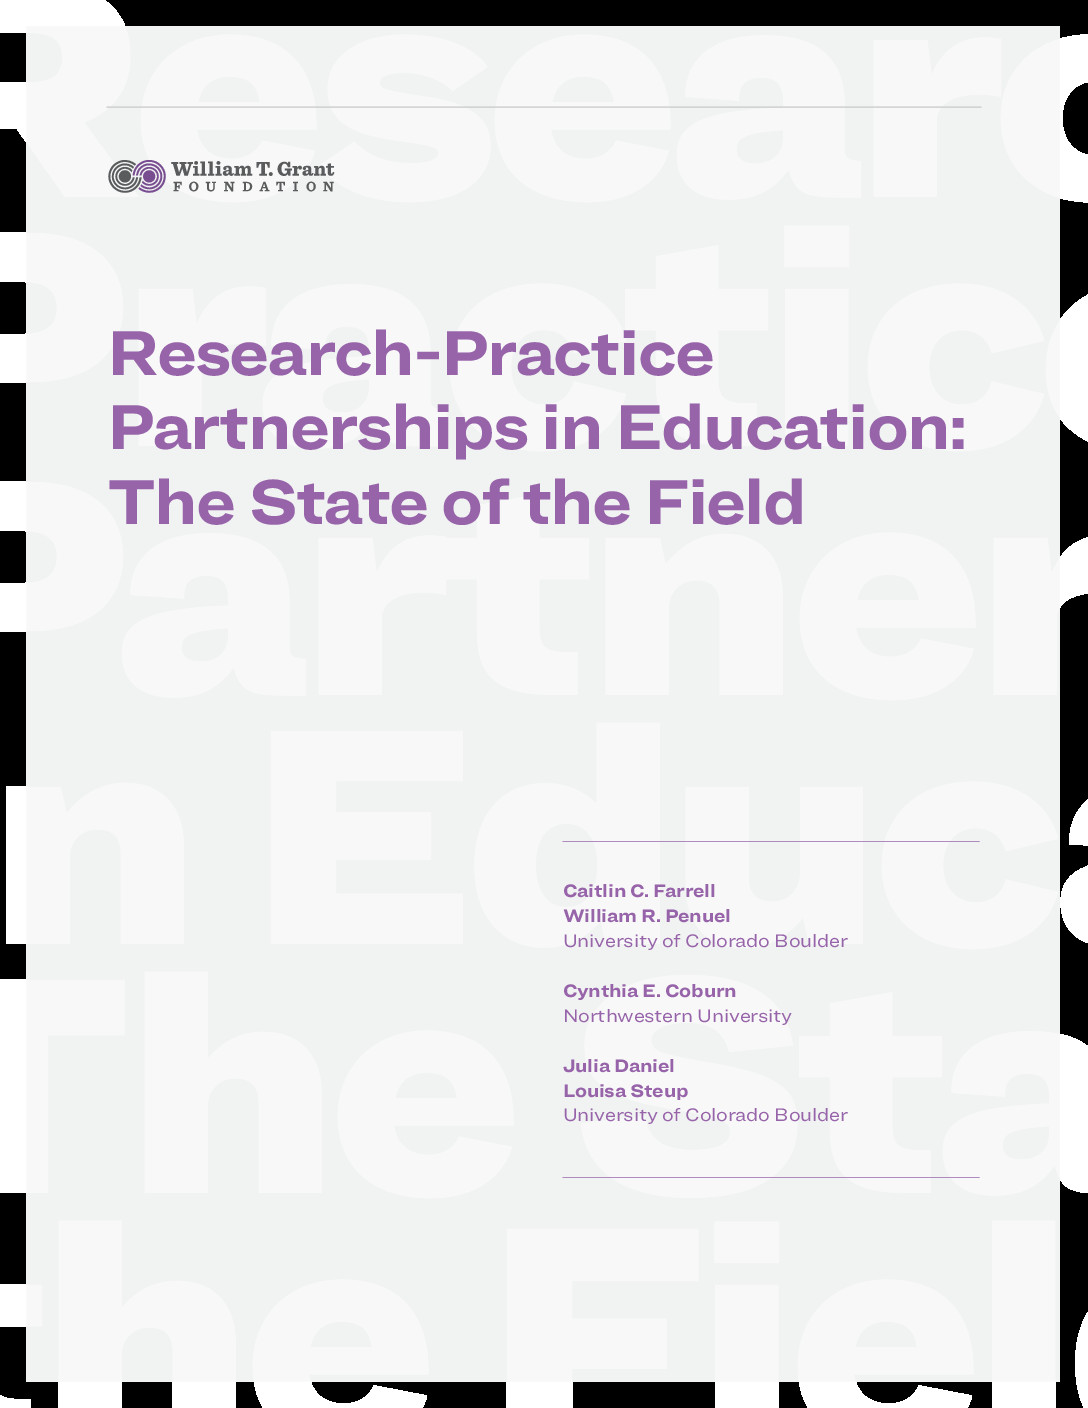 Research-Practice Partnerships in Education: The State of the Field